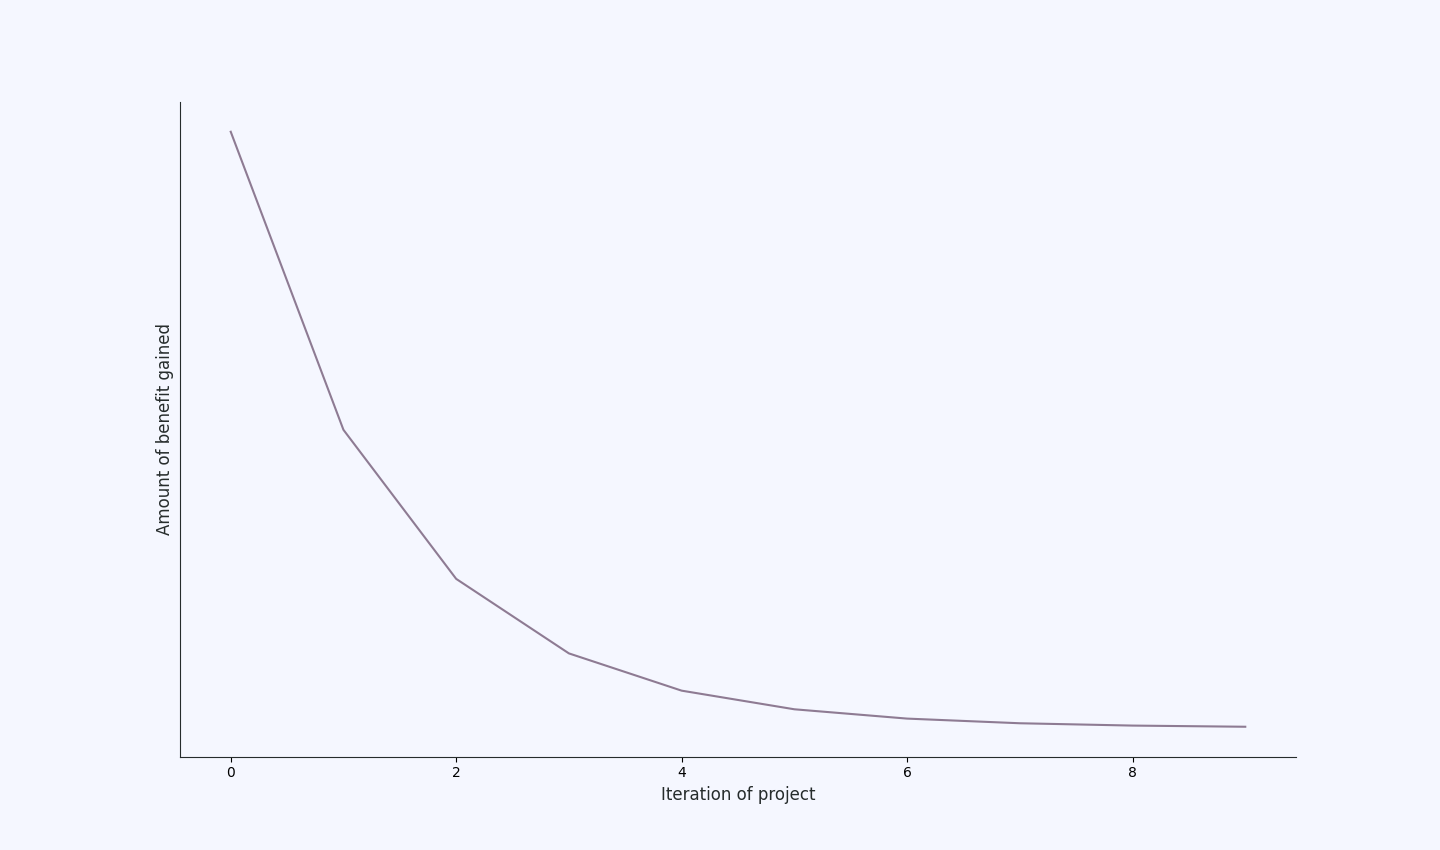 Graph of gained benefit per iteration of project